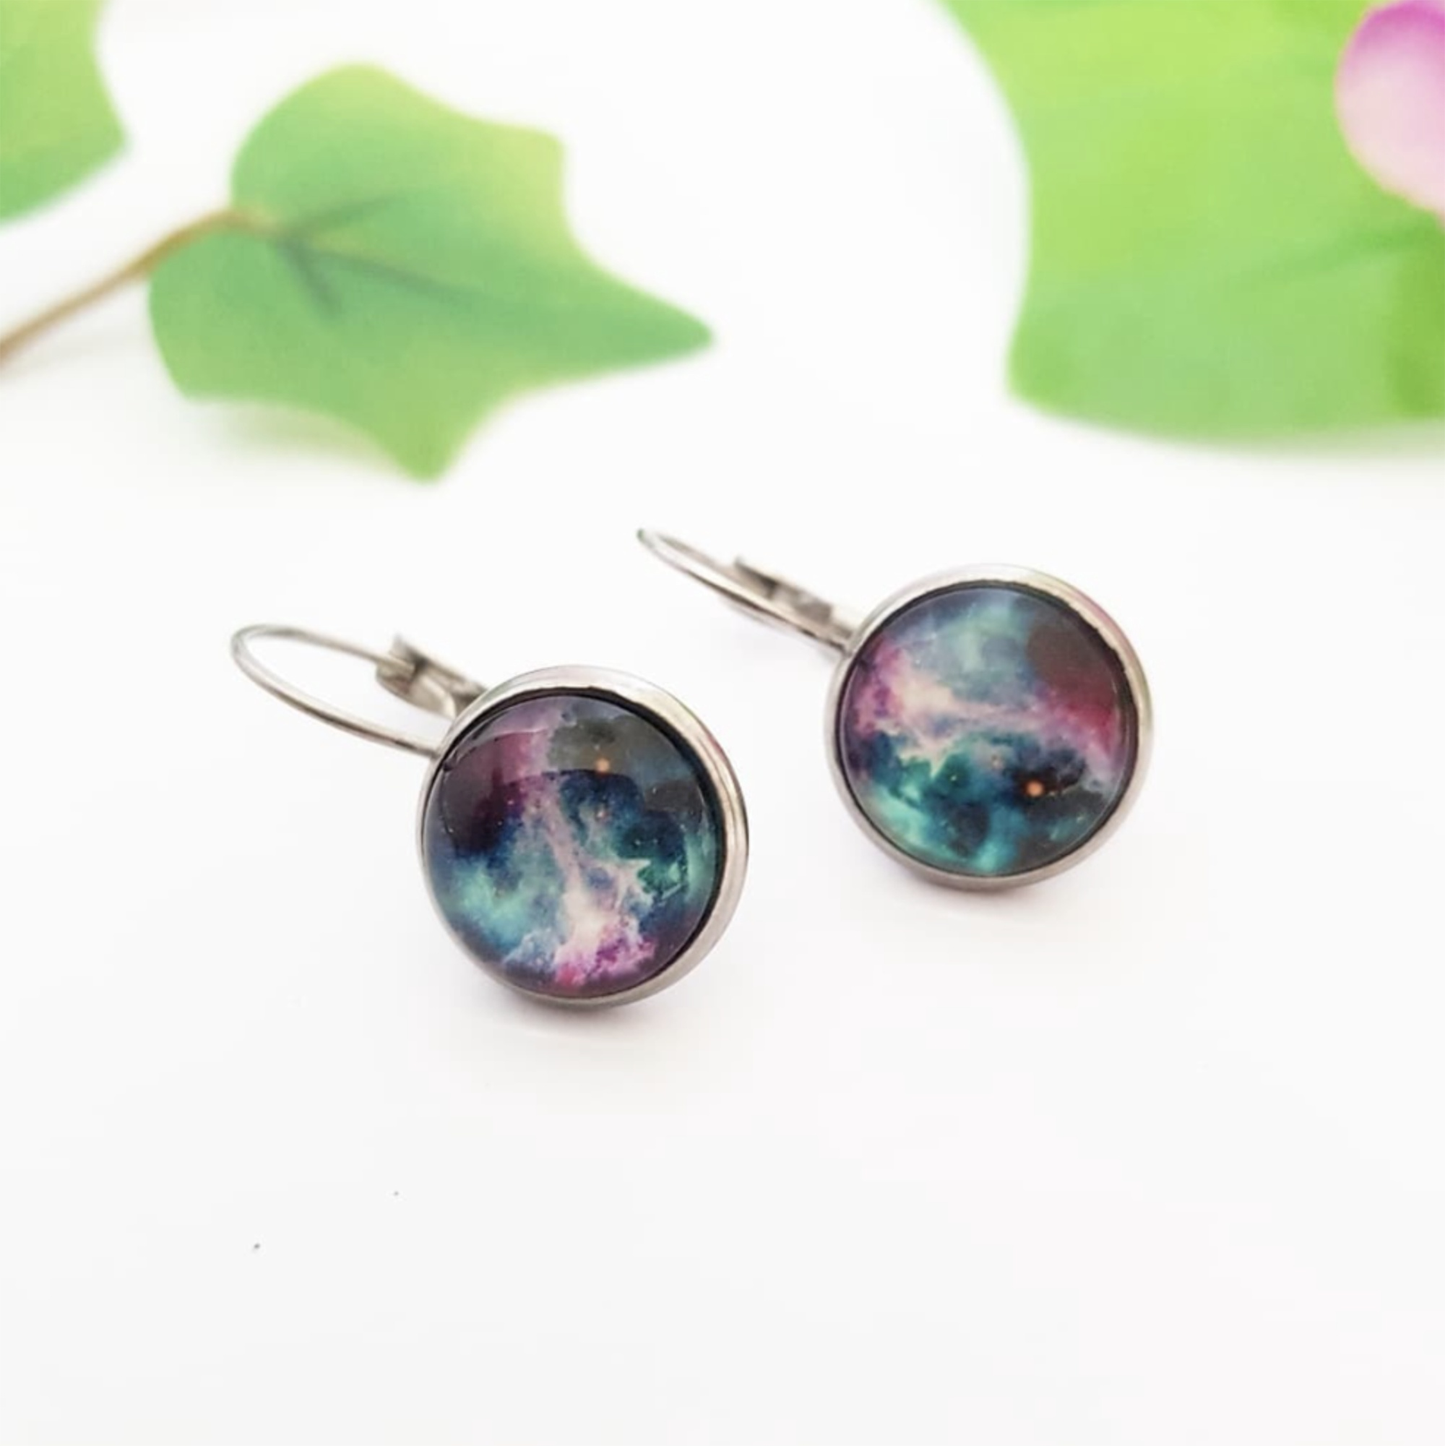 Star Galaxy Cabochon earrings - Lever back or Stud